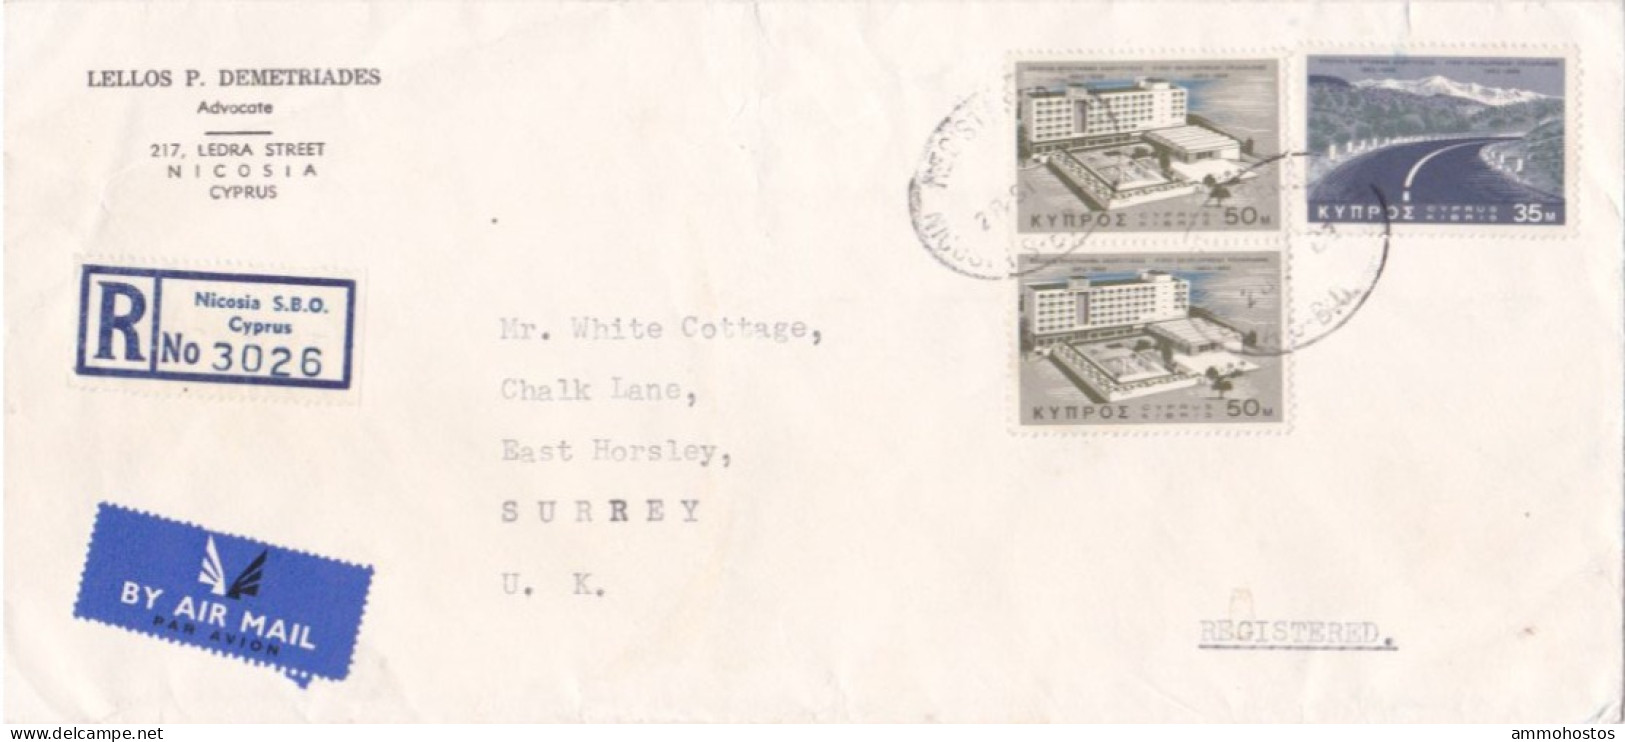 CYPRUS 1967 AIRMAIL REGISTERED COVER NICOSIA SBO UK 185 MILS RATE - Chypre (...-1960)